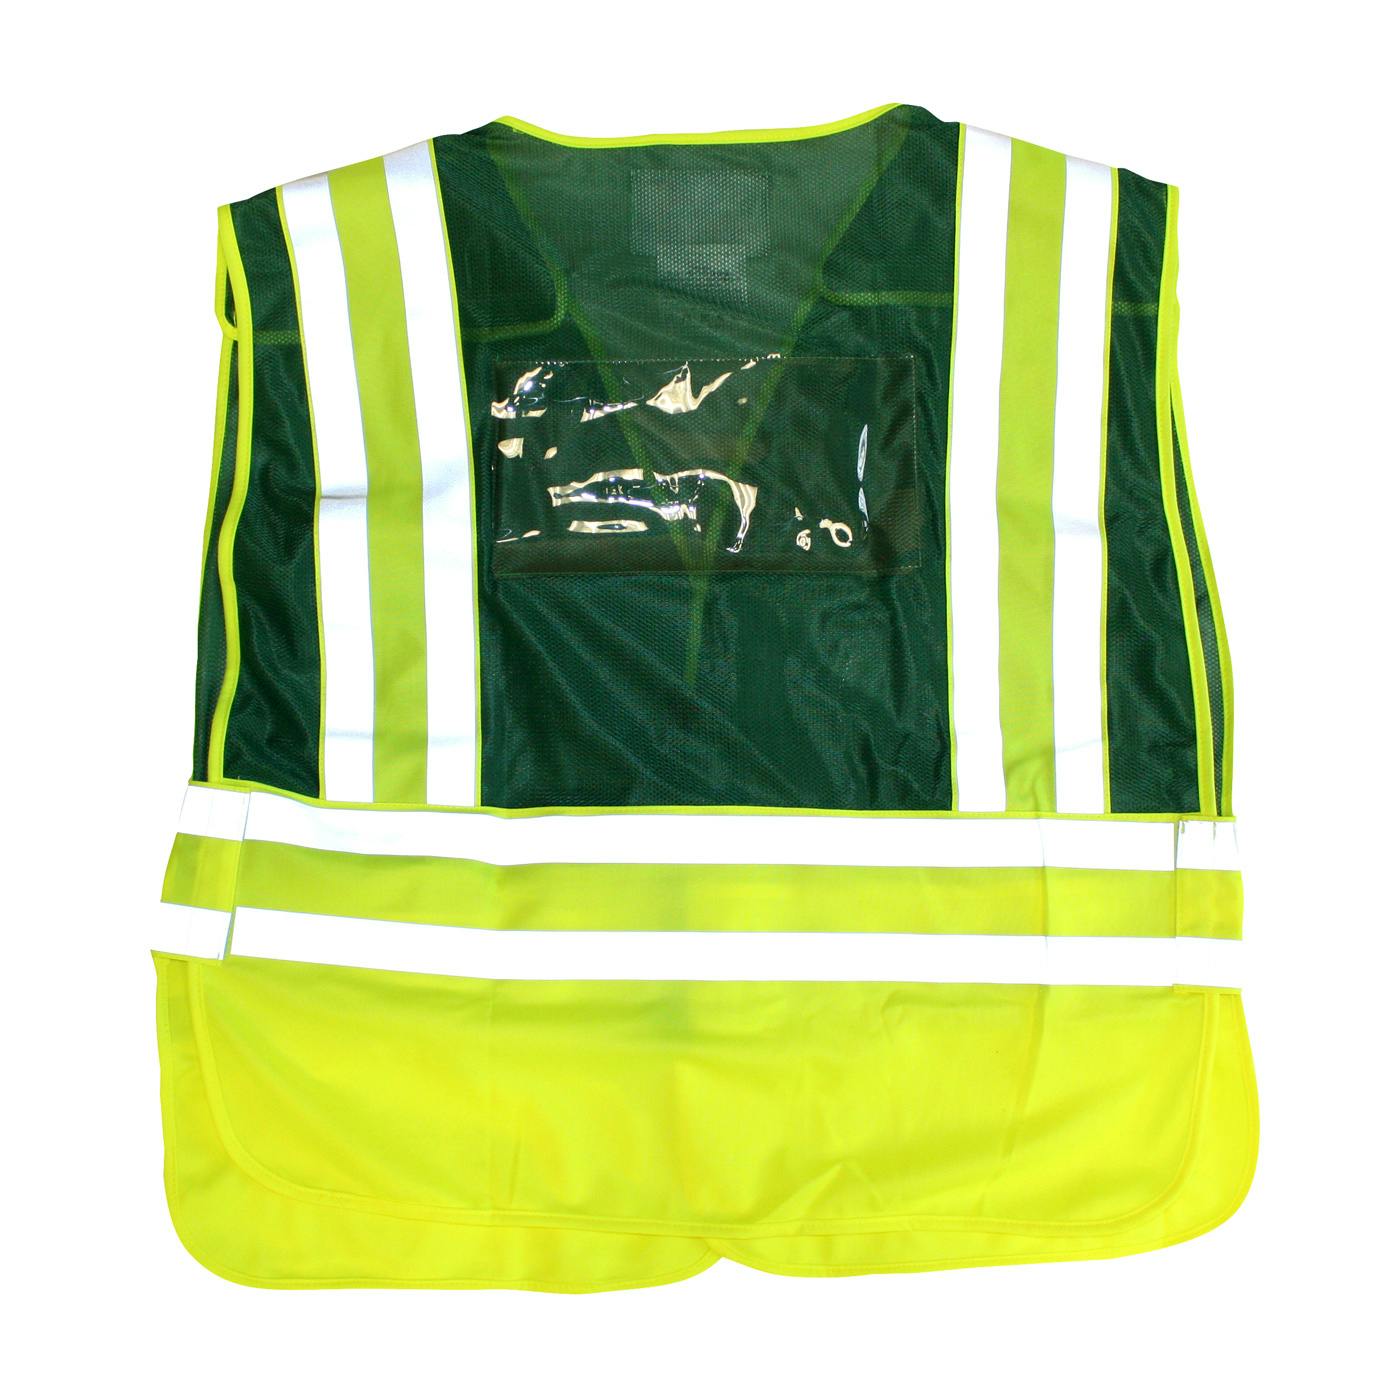 ANSI Type P Class 2 Incident Command Safety Vest, Green (302-PSV-GRN)